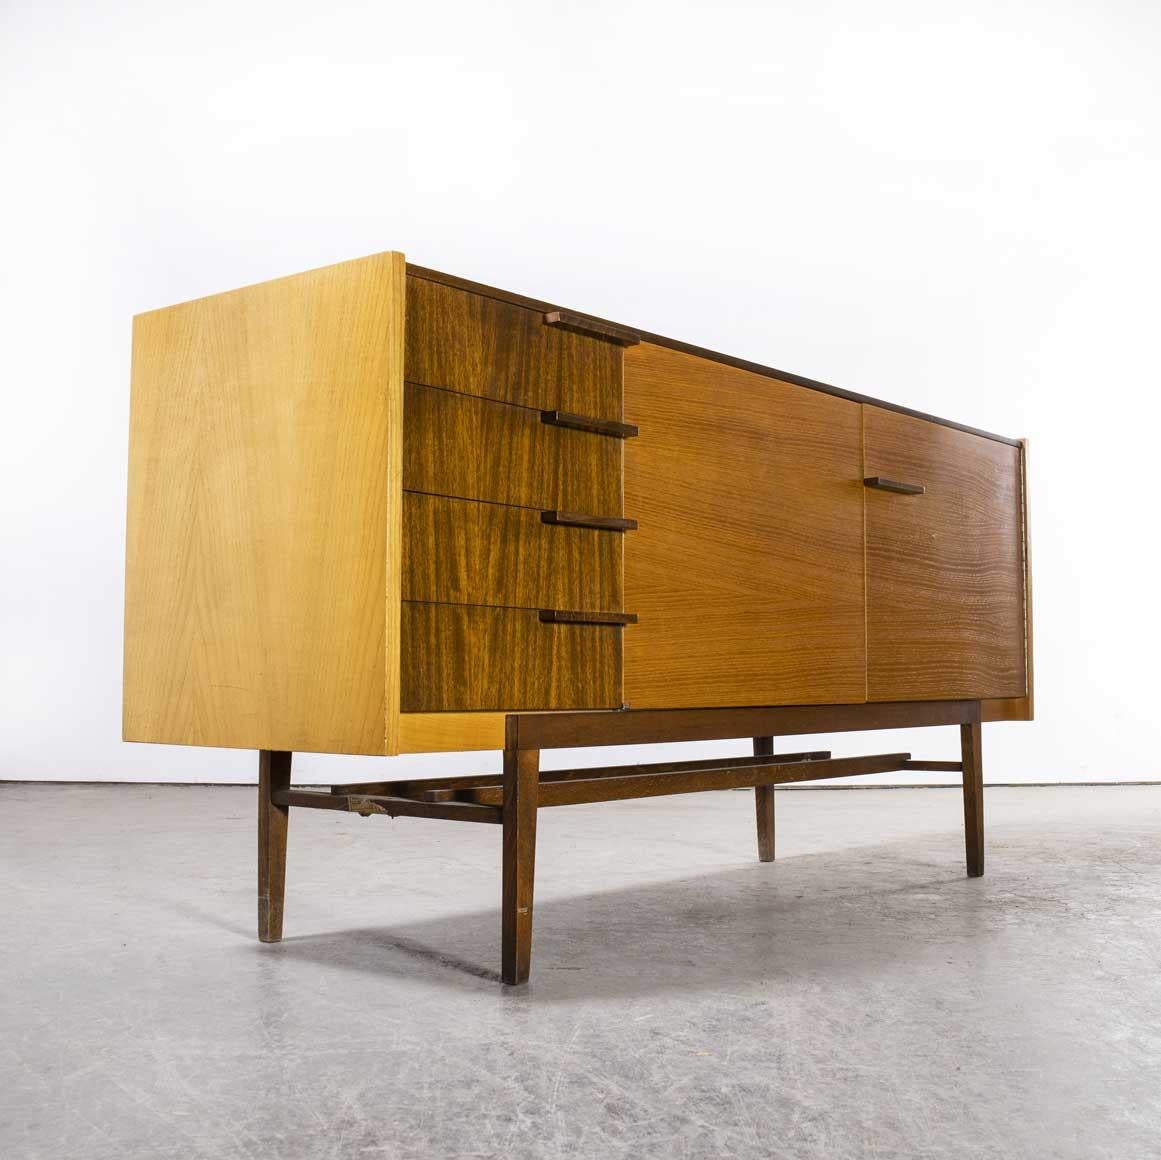 1960’s Large Mid Century Sideboard – Cabinet – Up Zavody
1960’s Large Mid Century Sideboard – Cabinet. Superb practical piece of mid century storage by the Czech maker Up Zavody and designed by Frantisek Mezulanik. Czech was a large producer of